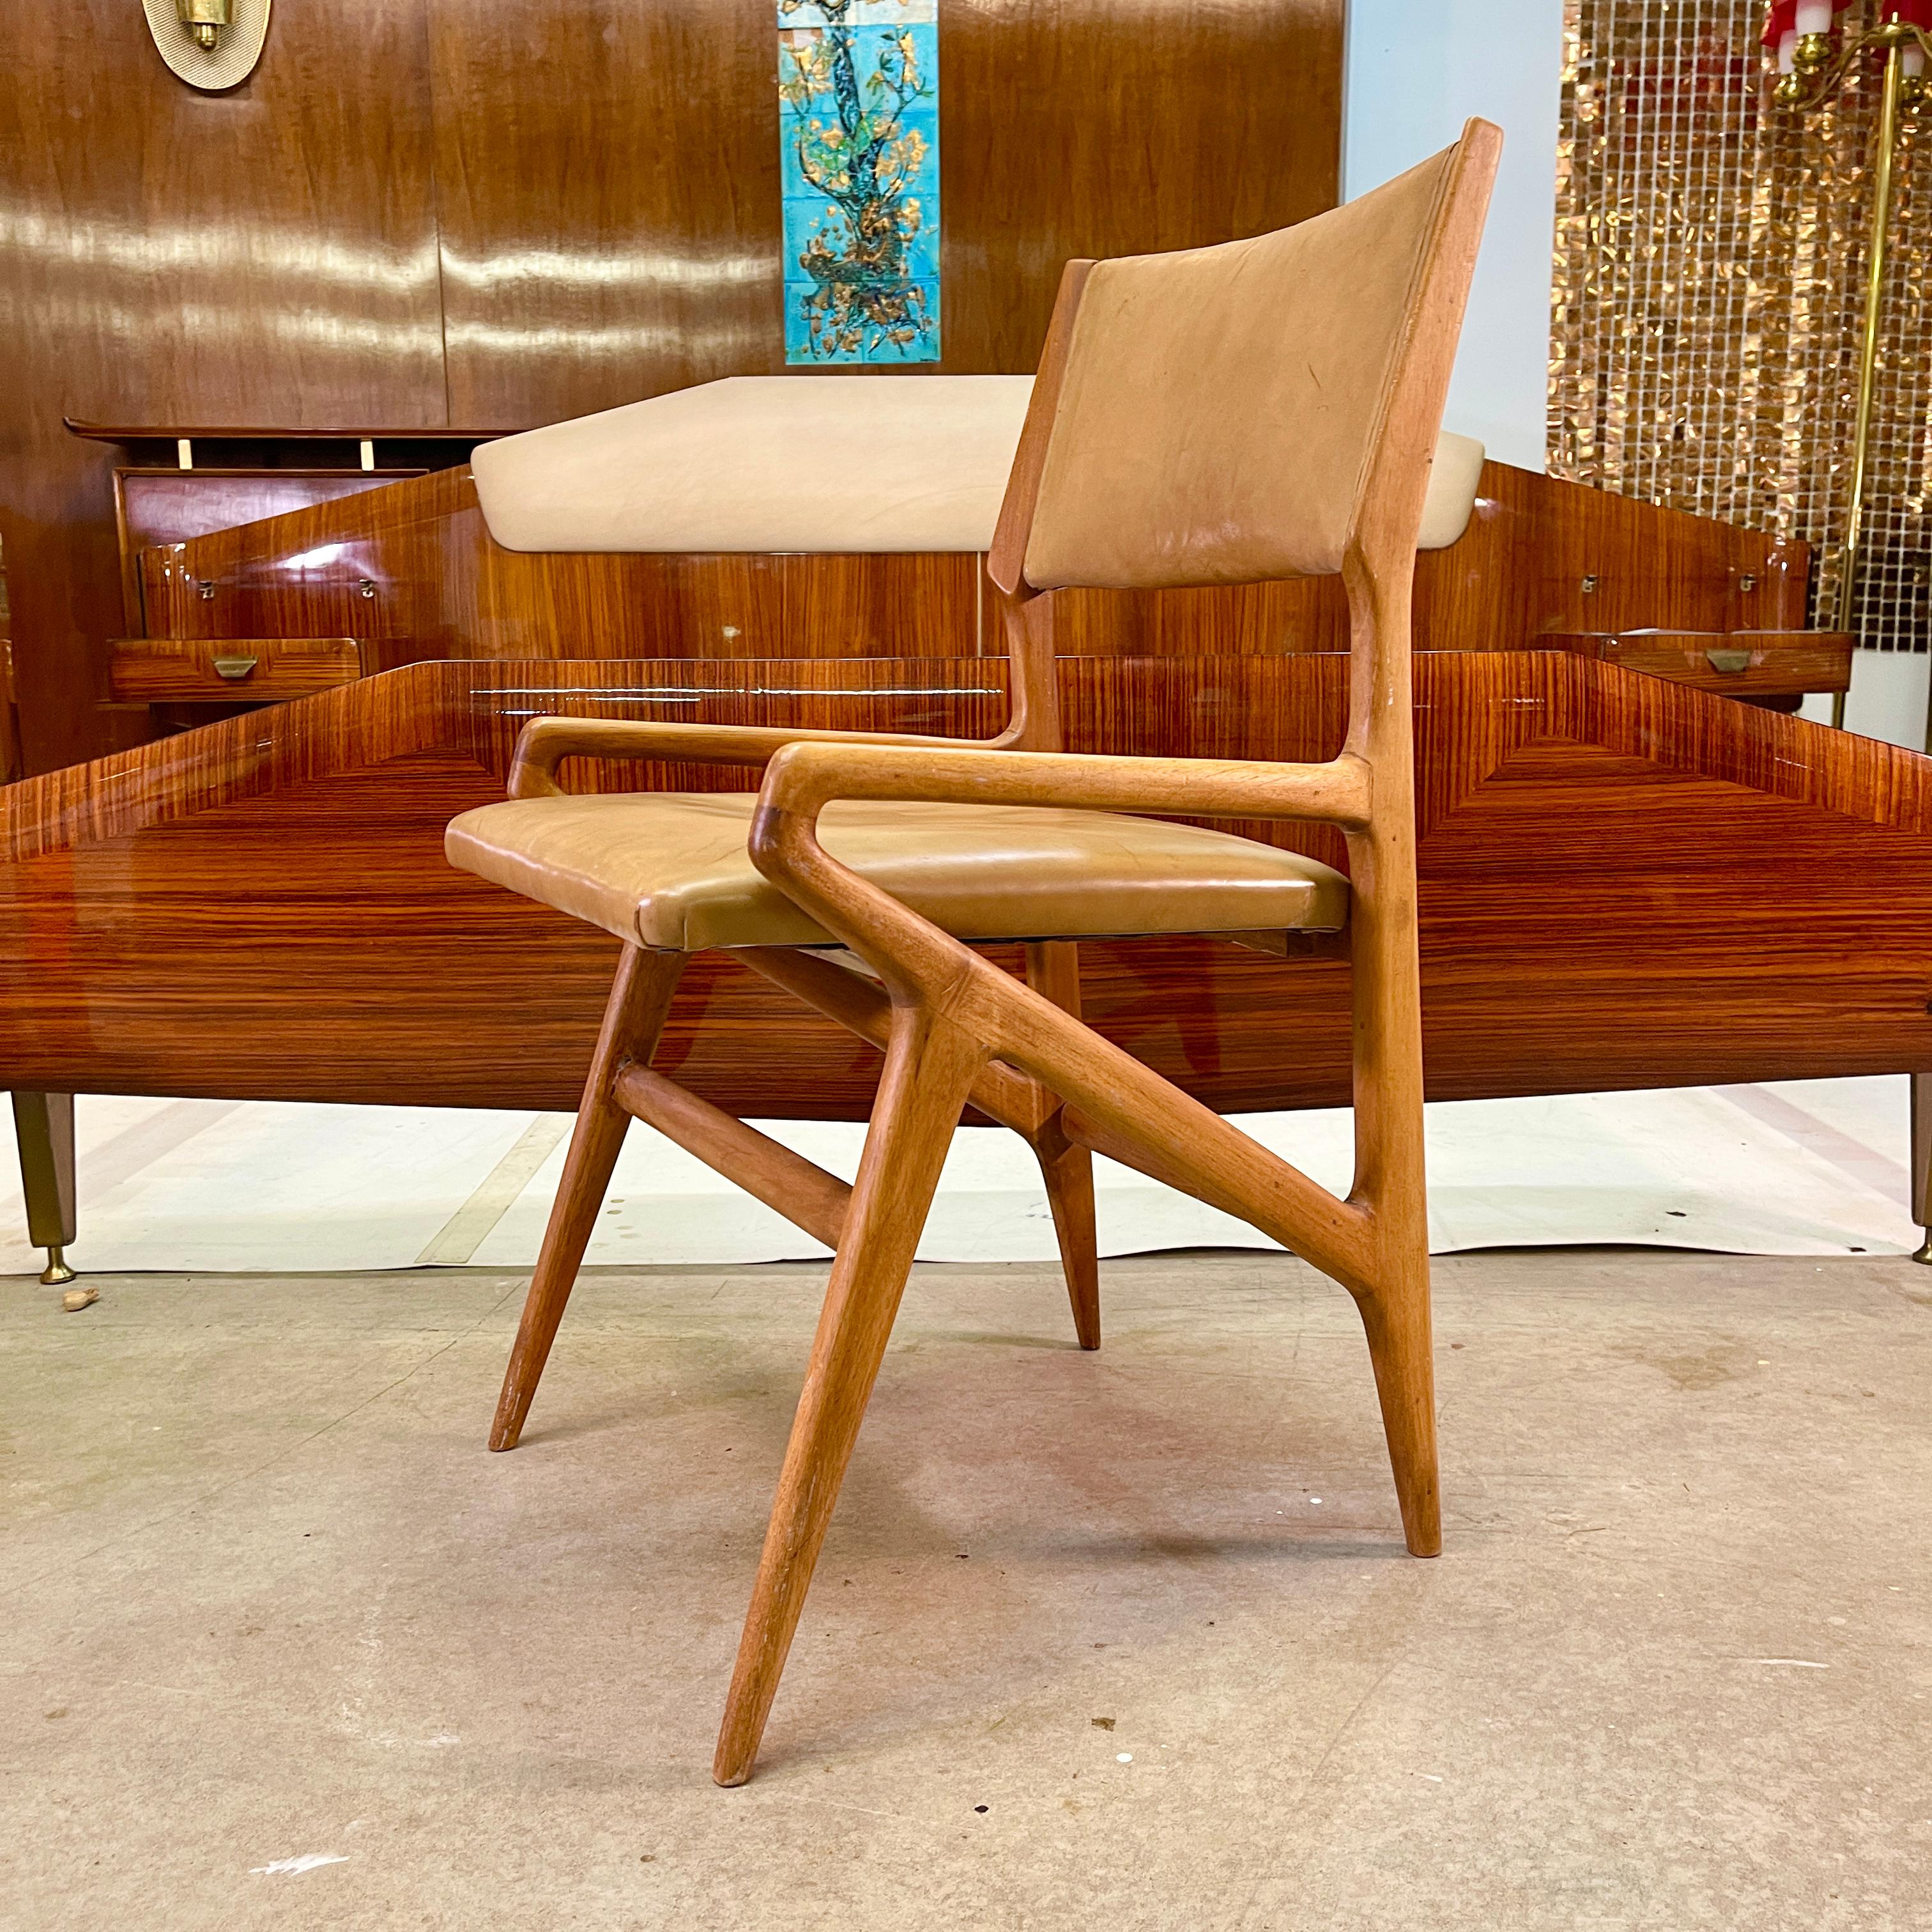 Gio Ponti designed chair model 688 produced by Cassina in 1952 for M. Singer & Son's, New York.
This is the armchair companion to the model 687 side chair (see original Cassina photos of both).
Original unrestored condition, not refinished.